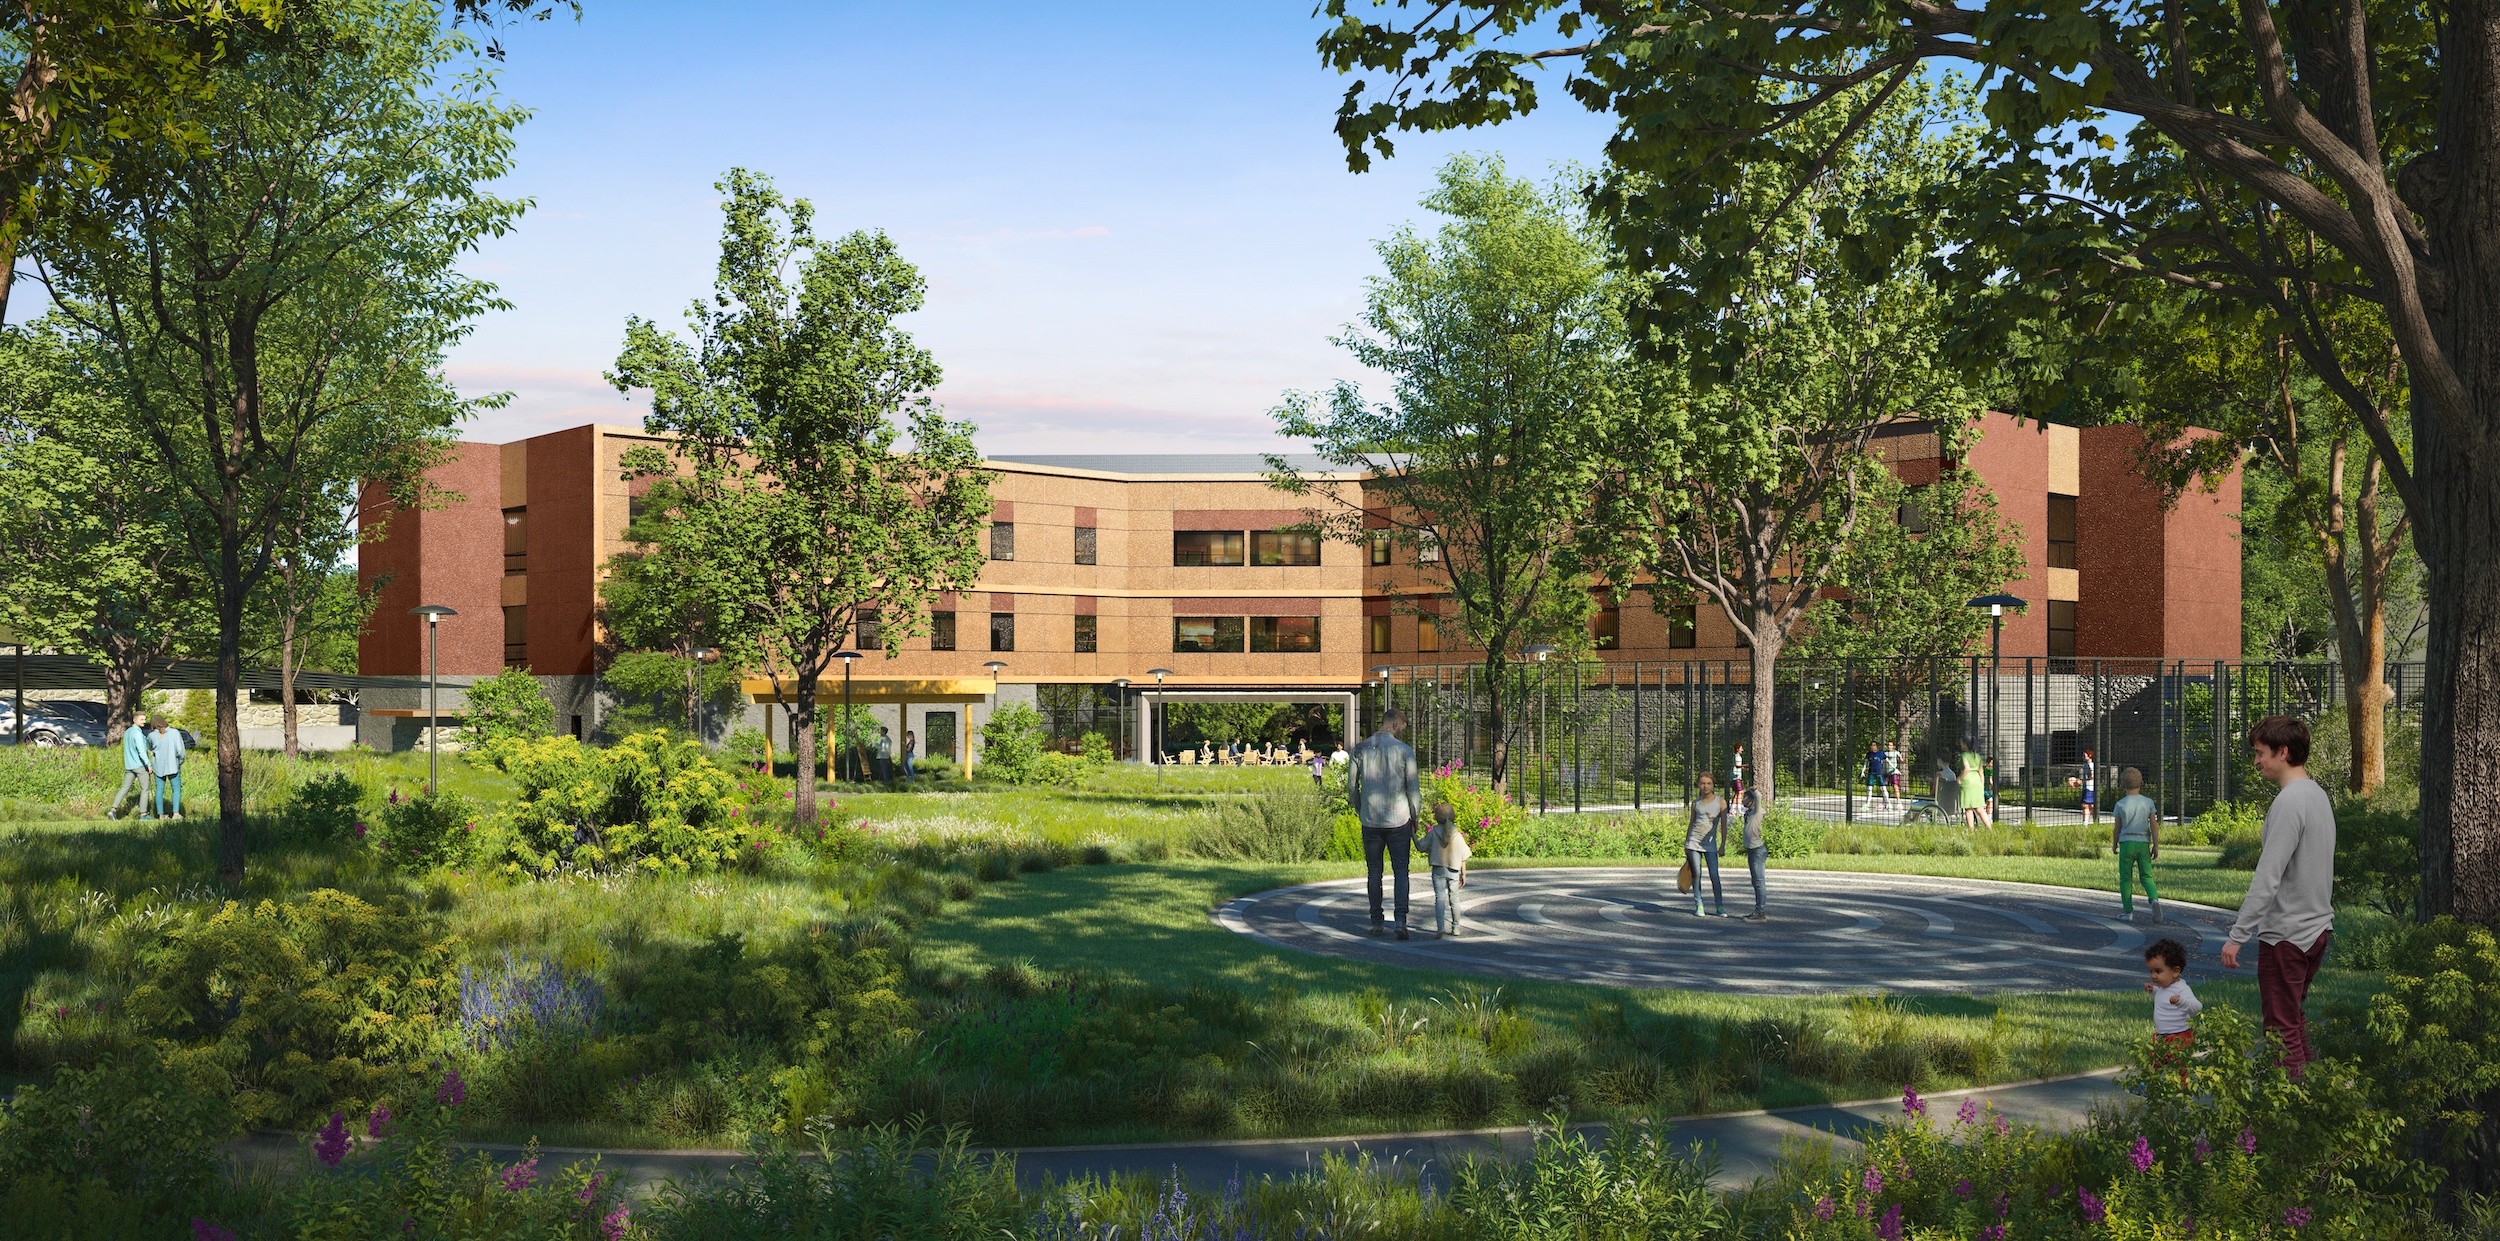 Cordilleras Health System Replacement Project Rendering courtesy CannonDesign